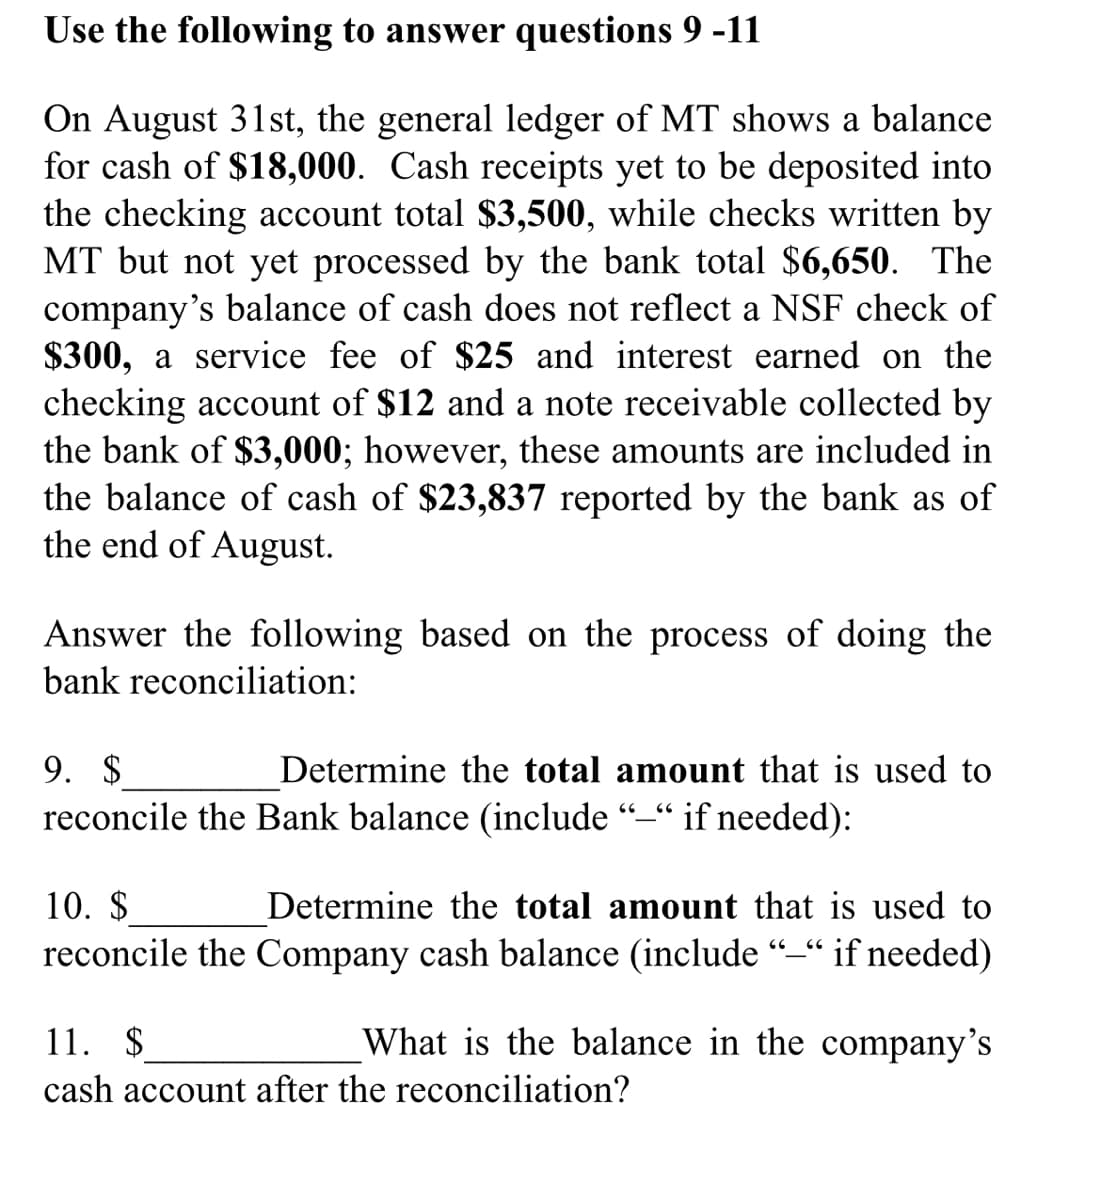 Use the following to answer questions 9 -11
On August 31st, the general ledger of MT shows a balance
for cash of $18,000. Cash receipts yet to be deposited into
the checking account total $3,500, while checks written by
MT but not yet processed by the bank total $6,650. The
company's balance of cash does not reflect a NSF check of
$300, a service fee of $25 and interest earned on the
checking account of $12 and a note receivable collected by
the bank of $3,000; however, these amounts are included in
the balance of cash of $23,837 reported by the bank as of
the end of August.
Answer the following based on the process of doing the
bank reconciliation:
9. $
reconcile the Bank balance (include “–“ if needed):
Determine the total amount that is used to
10. $
Determine the total amount that is used to
reconcile the Company cash balance (include
if needed)
11. $
What is the balance in the company's
cash account after the reconciliation?
